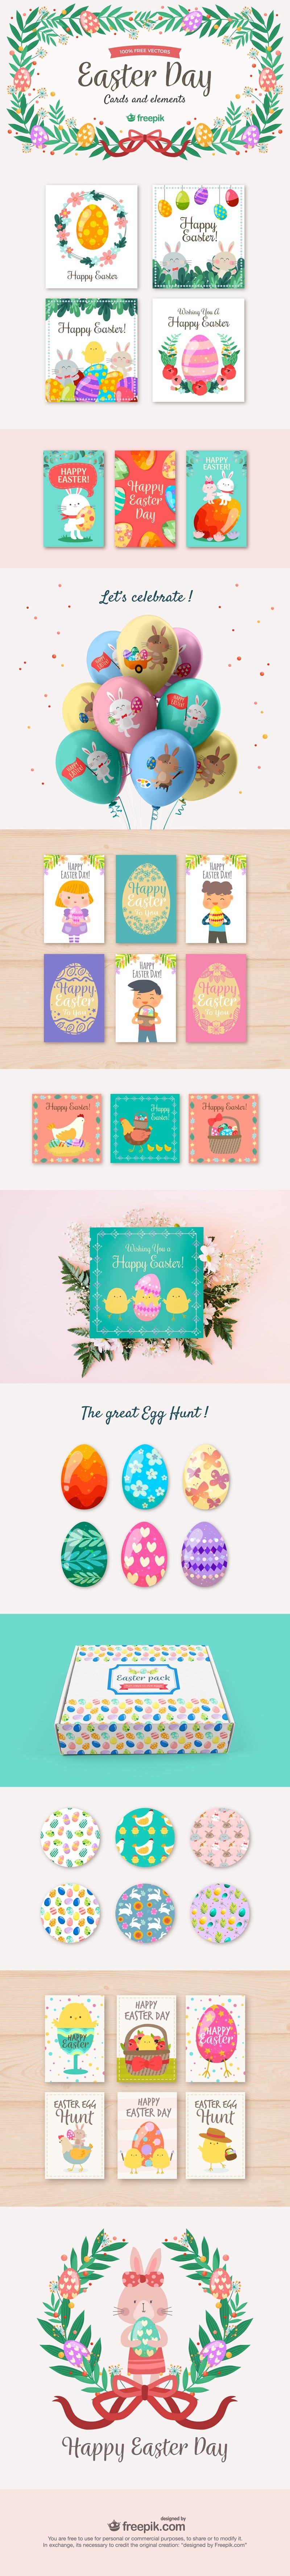 free Easter elements and cards